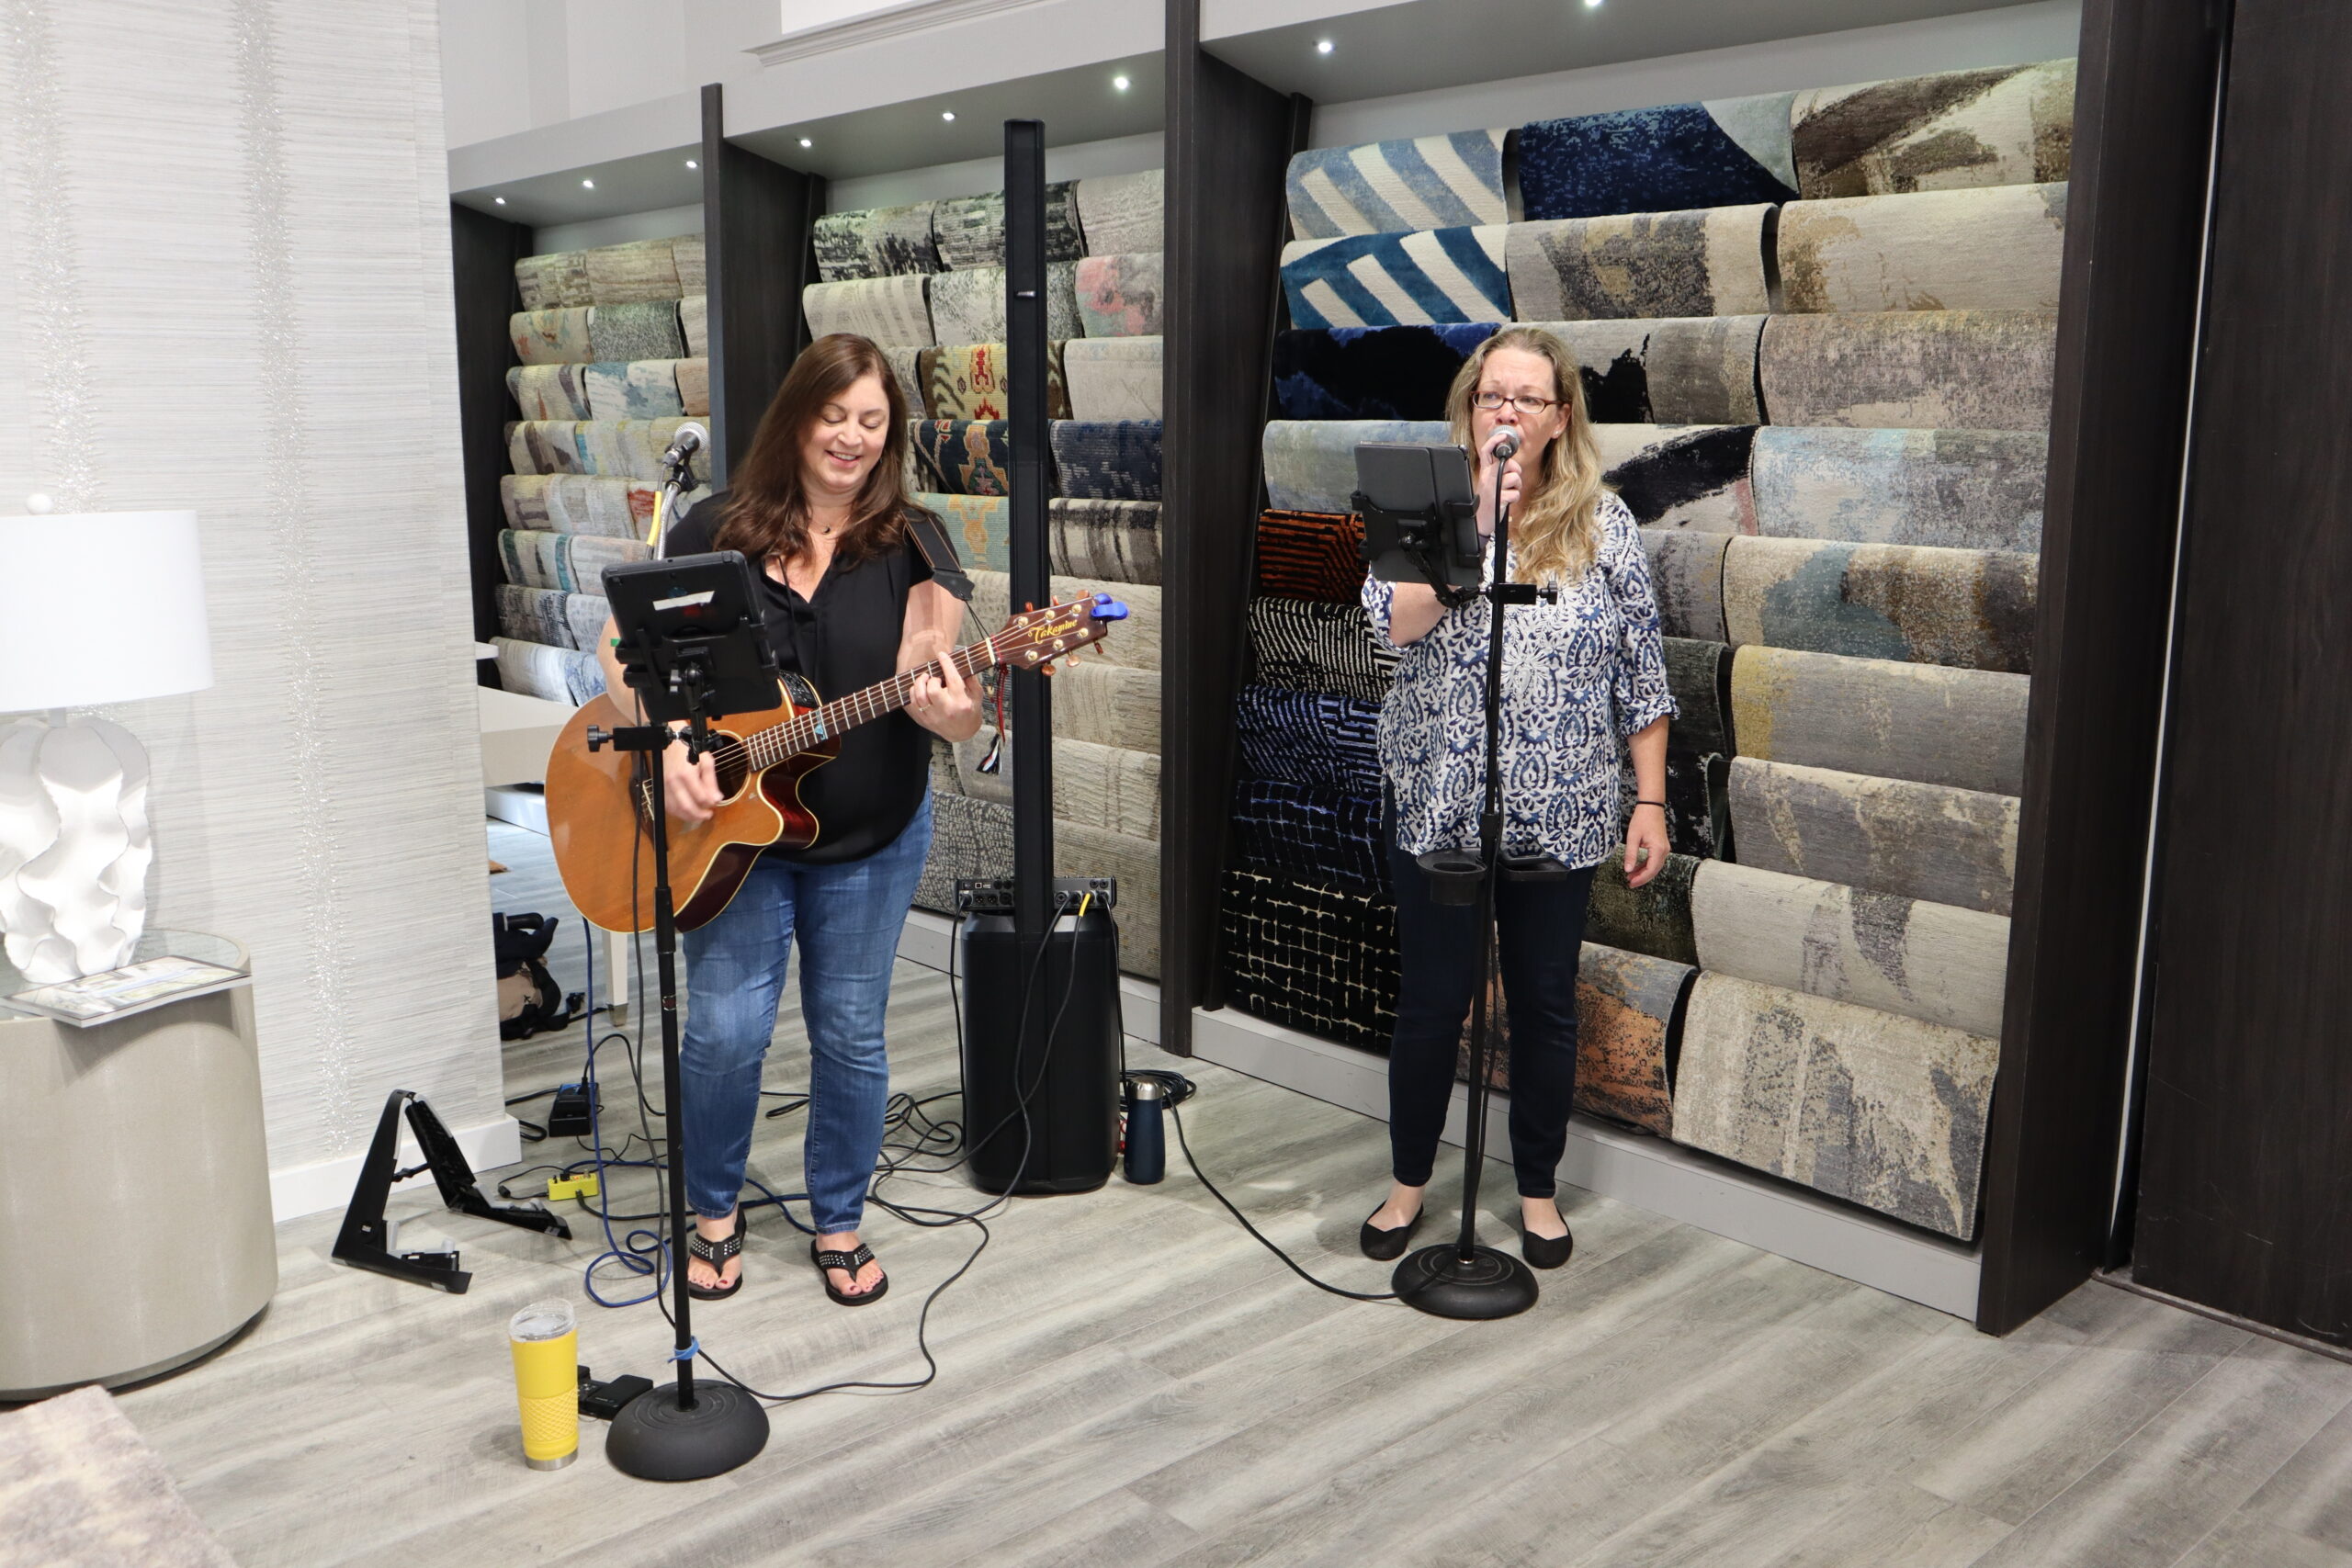 The Barroom Girls, Jessie Haynes and Erin Doherty, perform at the grand opening of The Carpetman by Stark. MEGAN NAFTALI